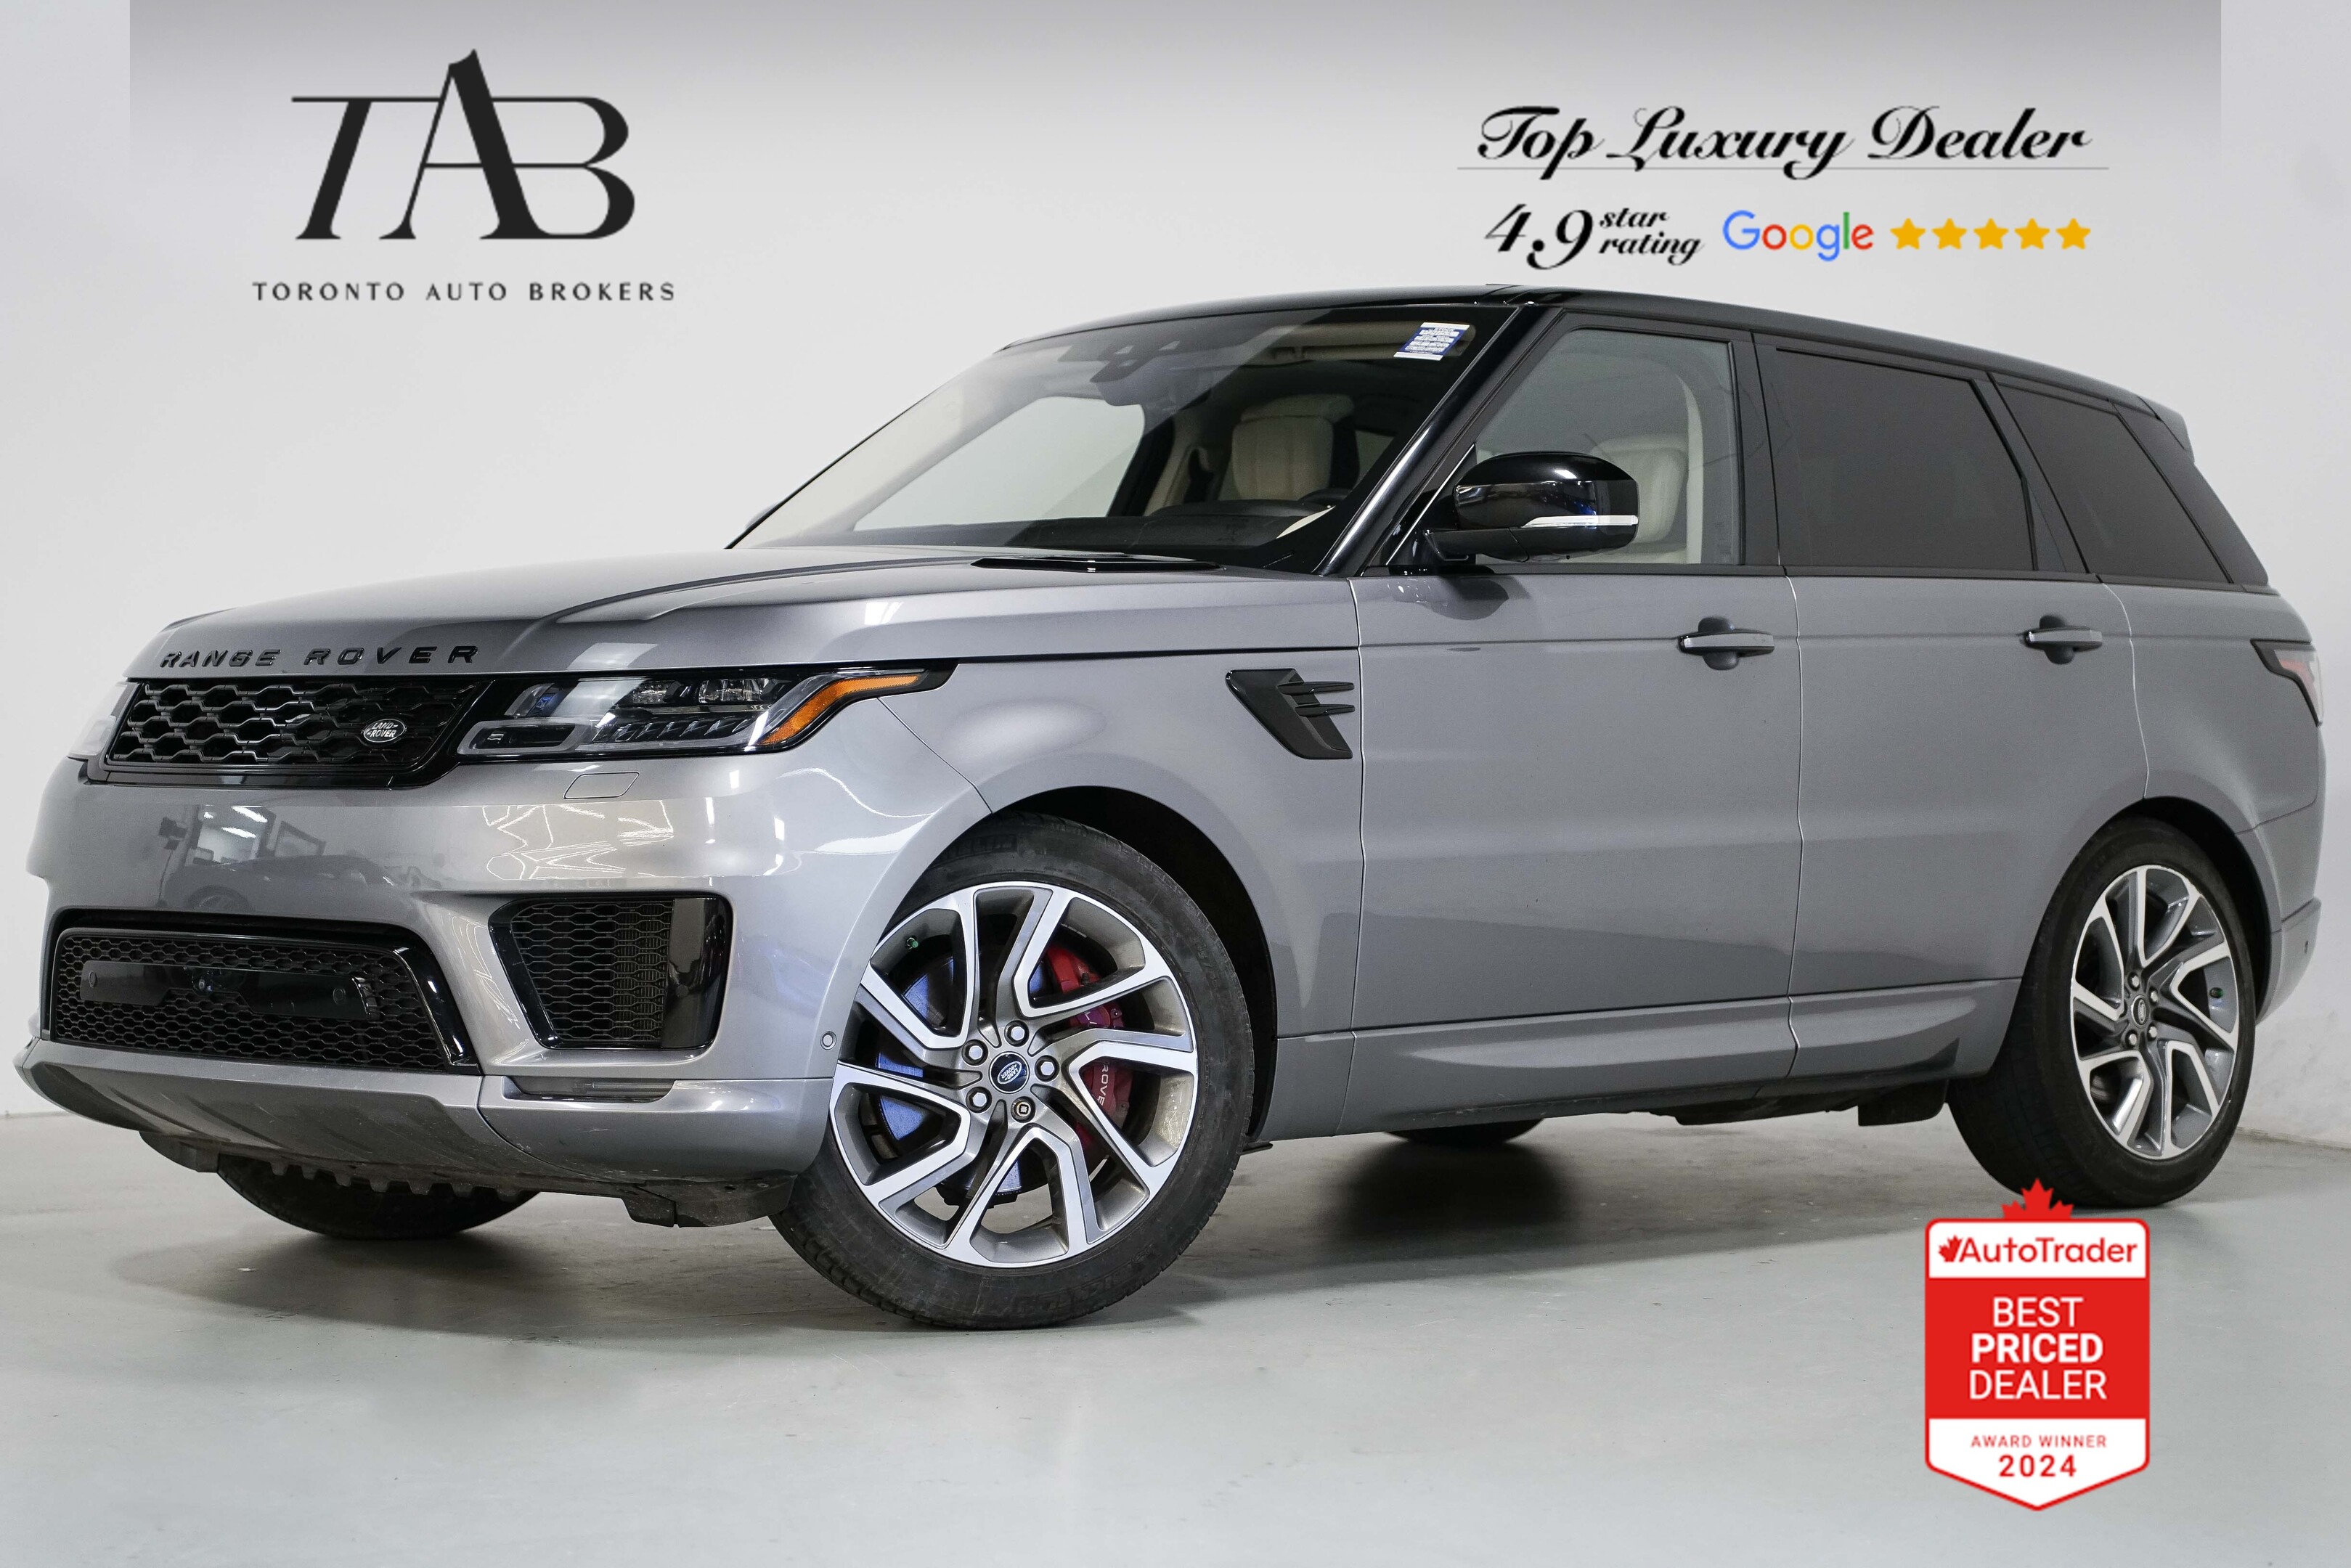 2020 Land Rover Range Rover Sport P400E AUTOBIOGRAPHY | PLUG IN HYBRID |21 IN WHEELS